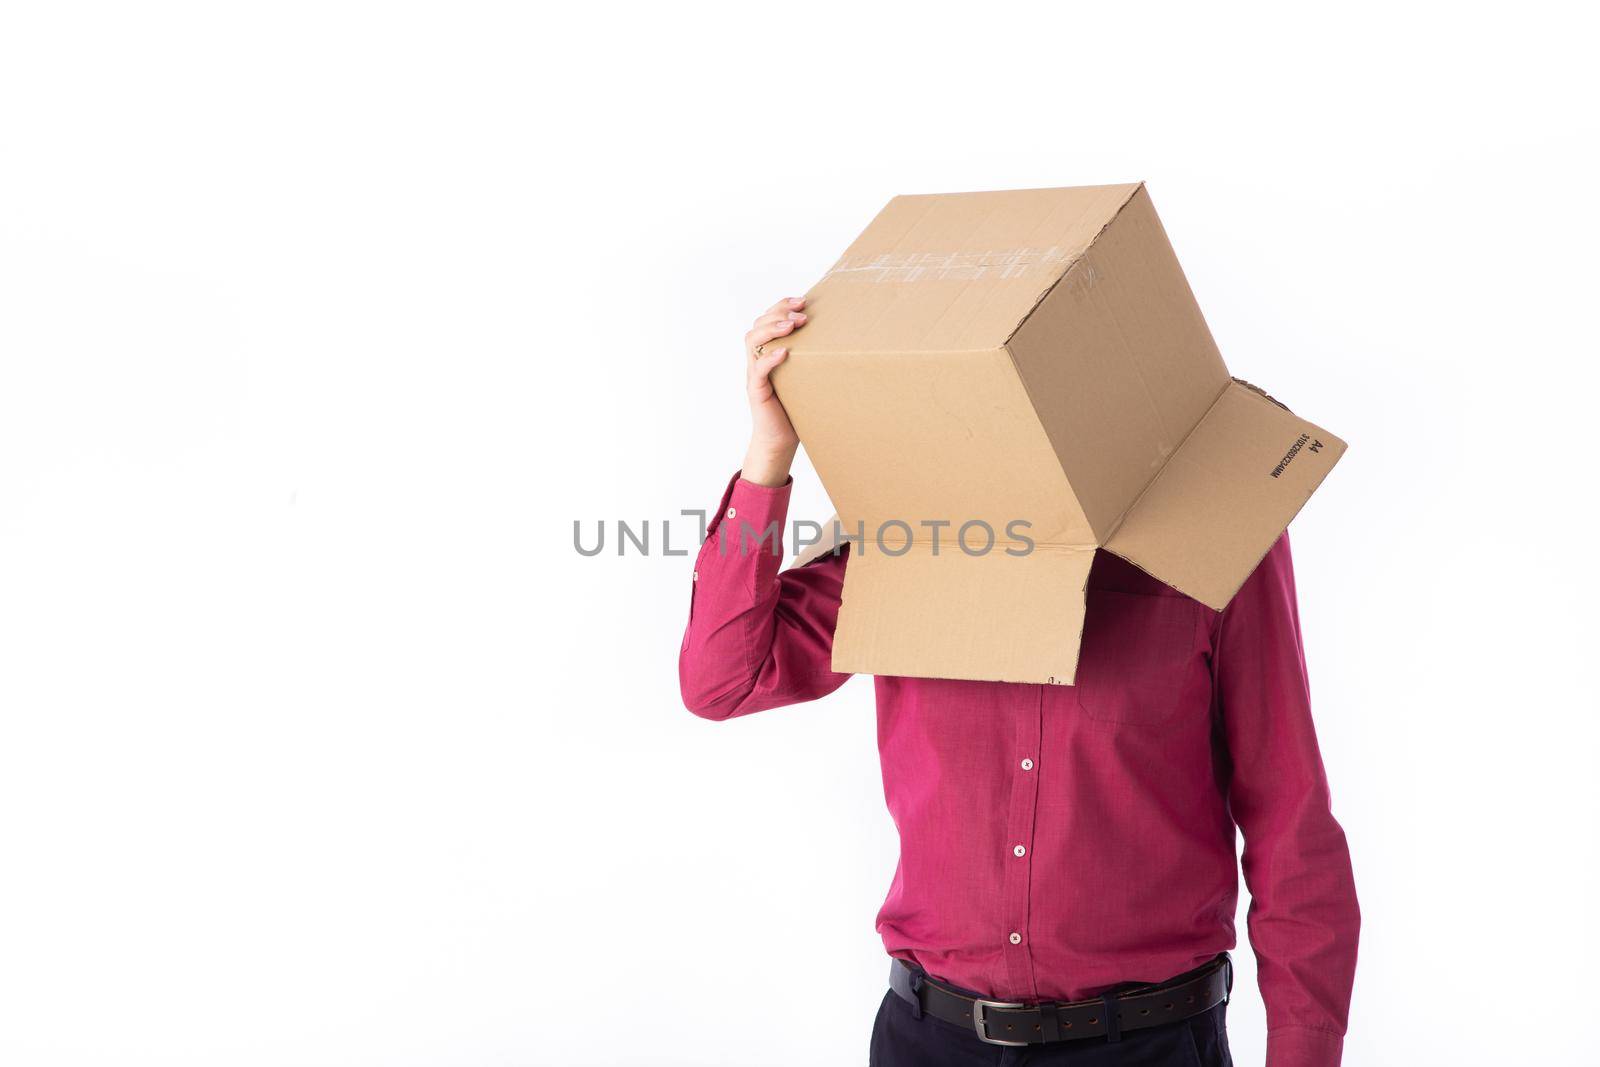 man in a red shirt with a cardboard box on his head makes a gesture with his hands by tehcheesiong